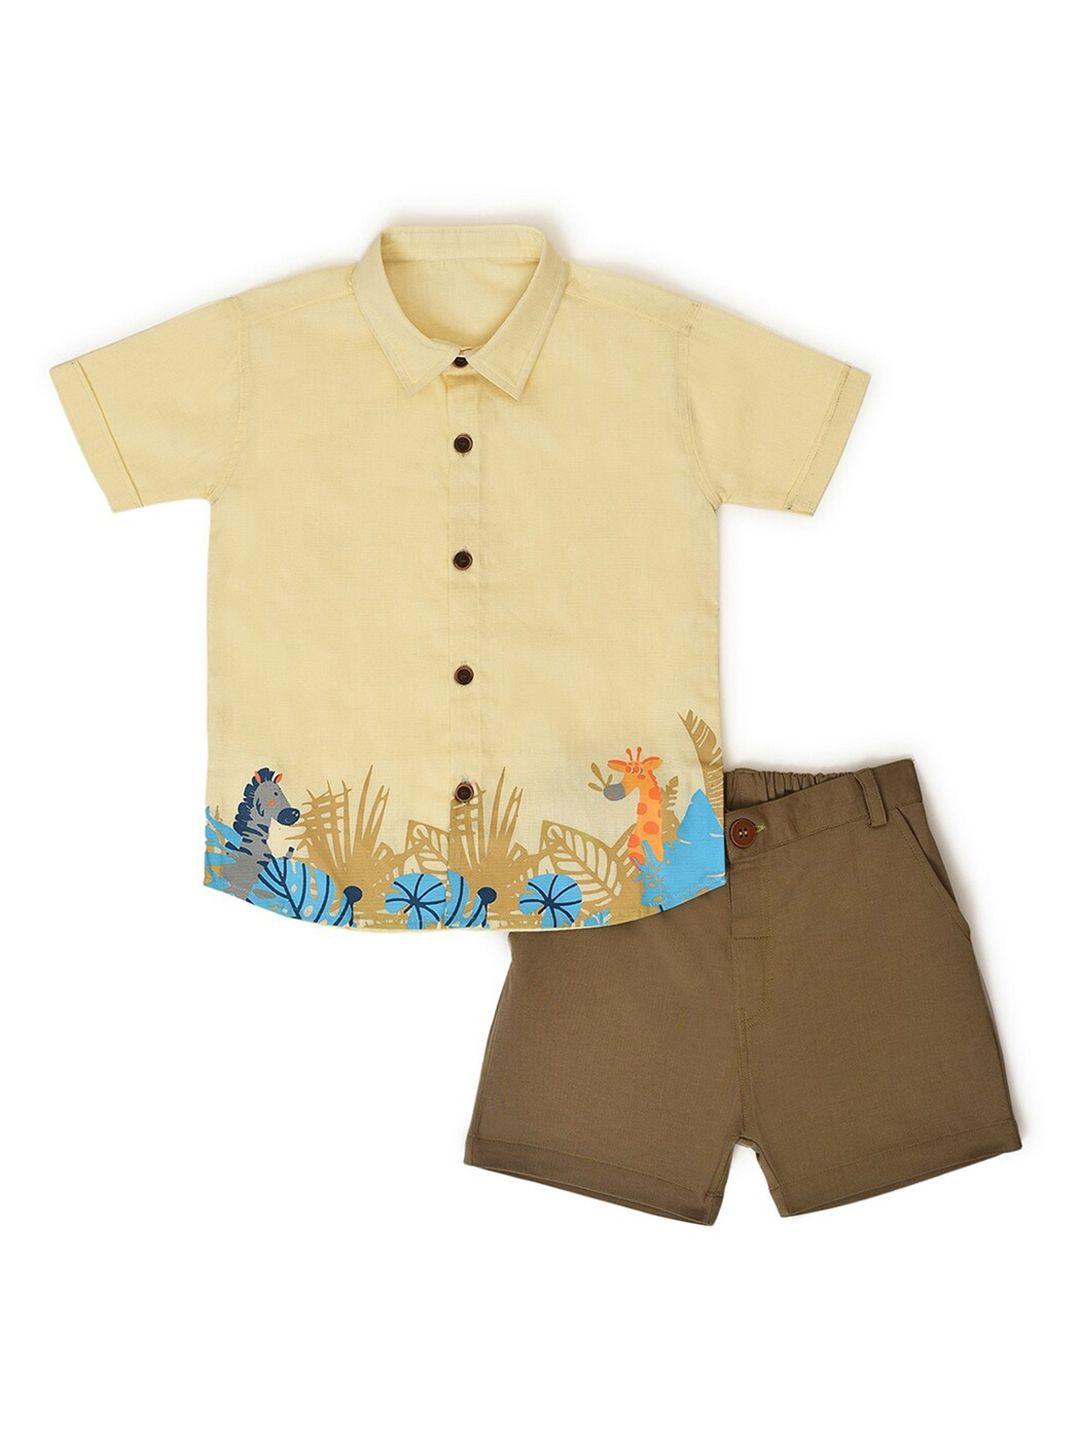 miarcus boy printed pure cotton shirt with shorts